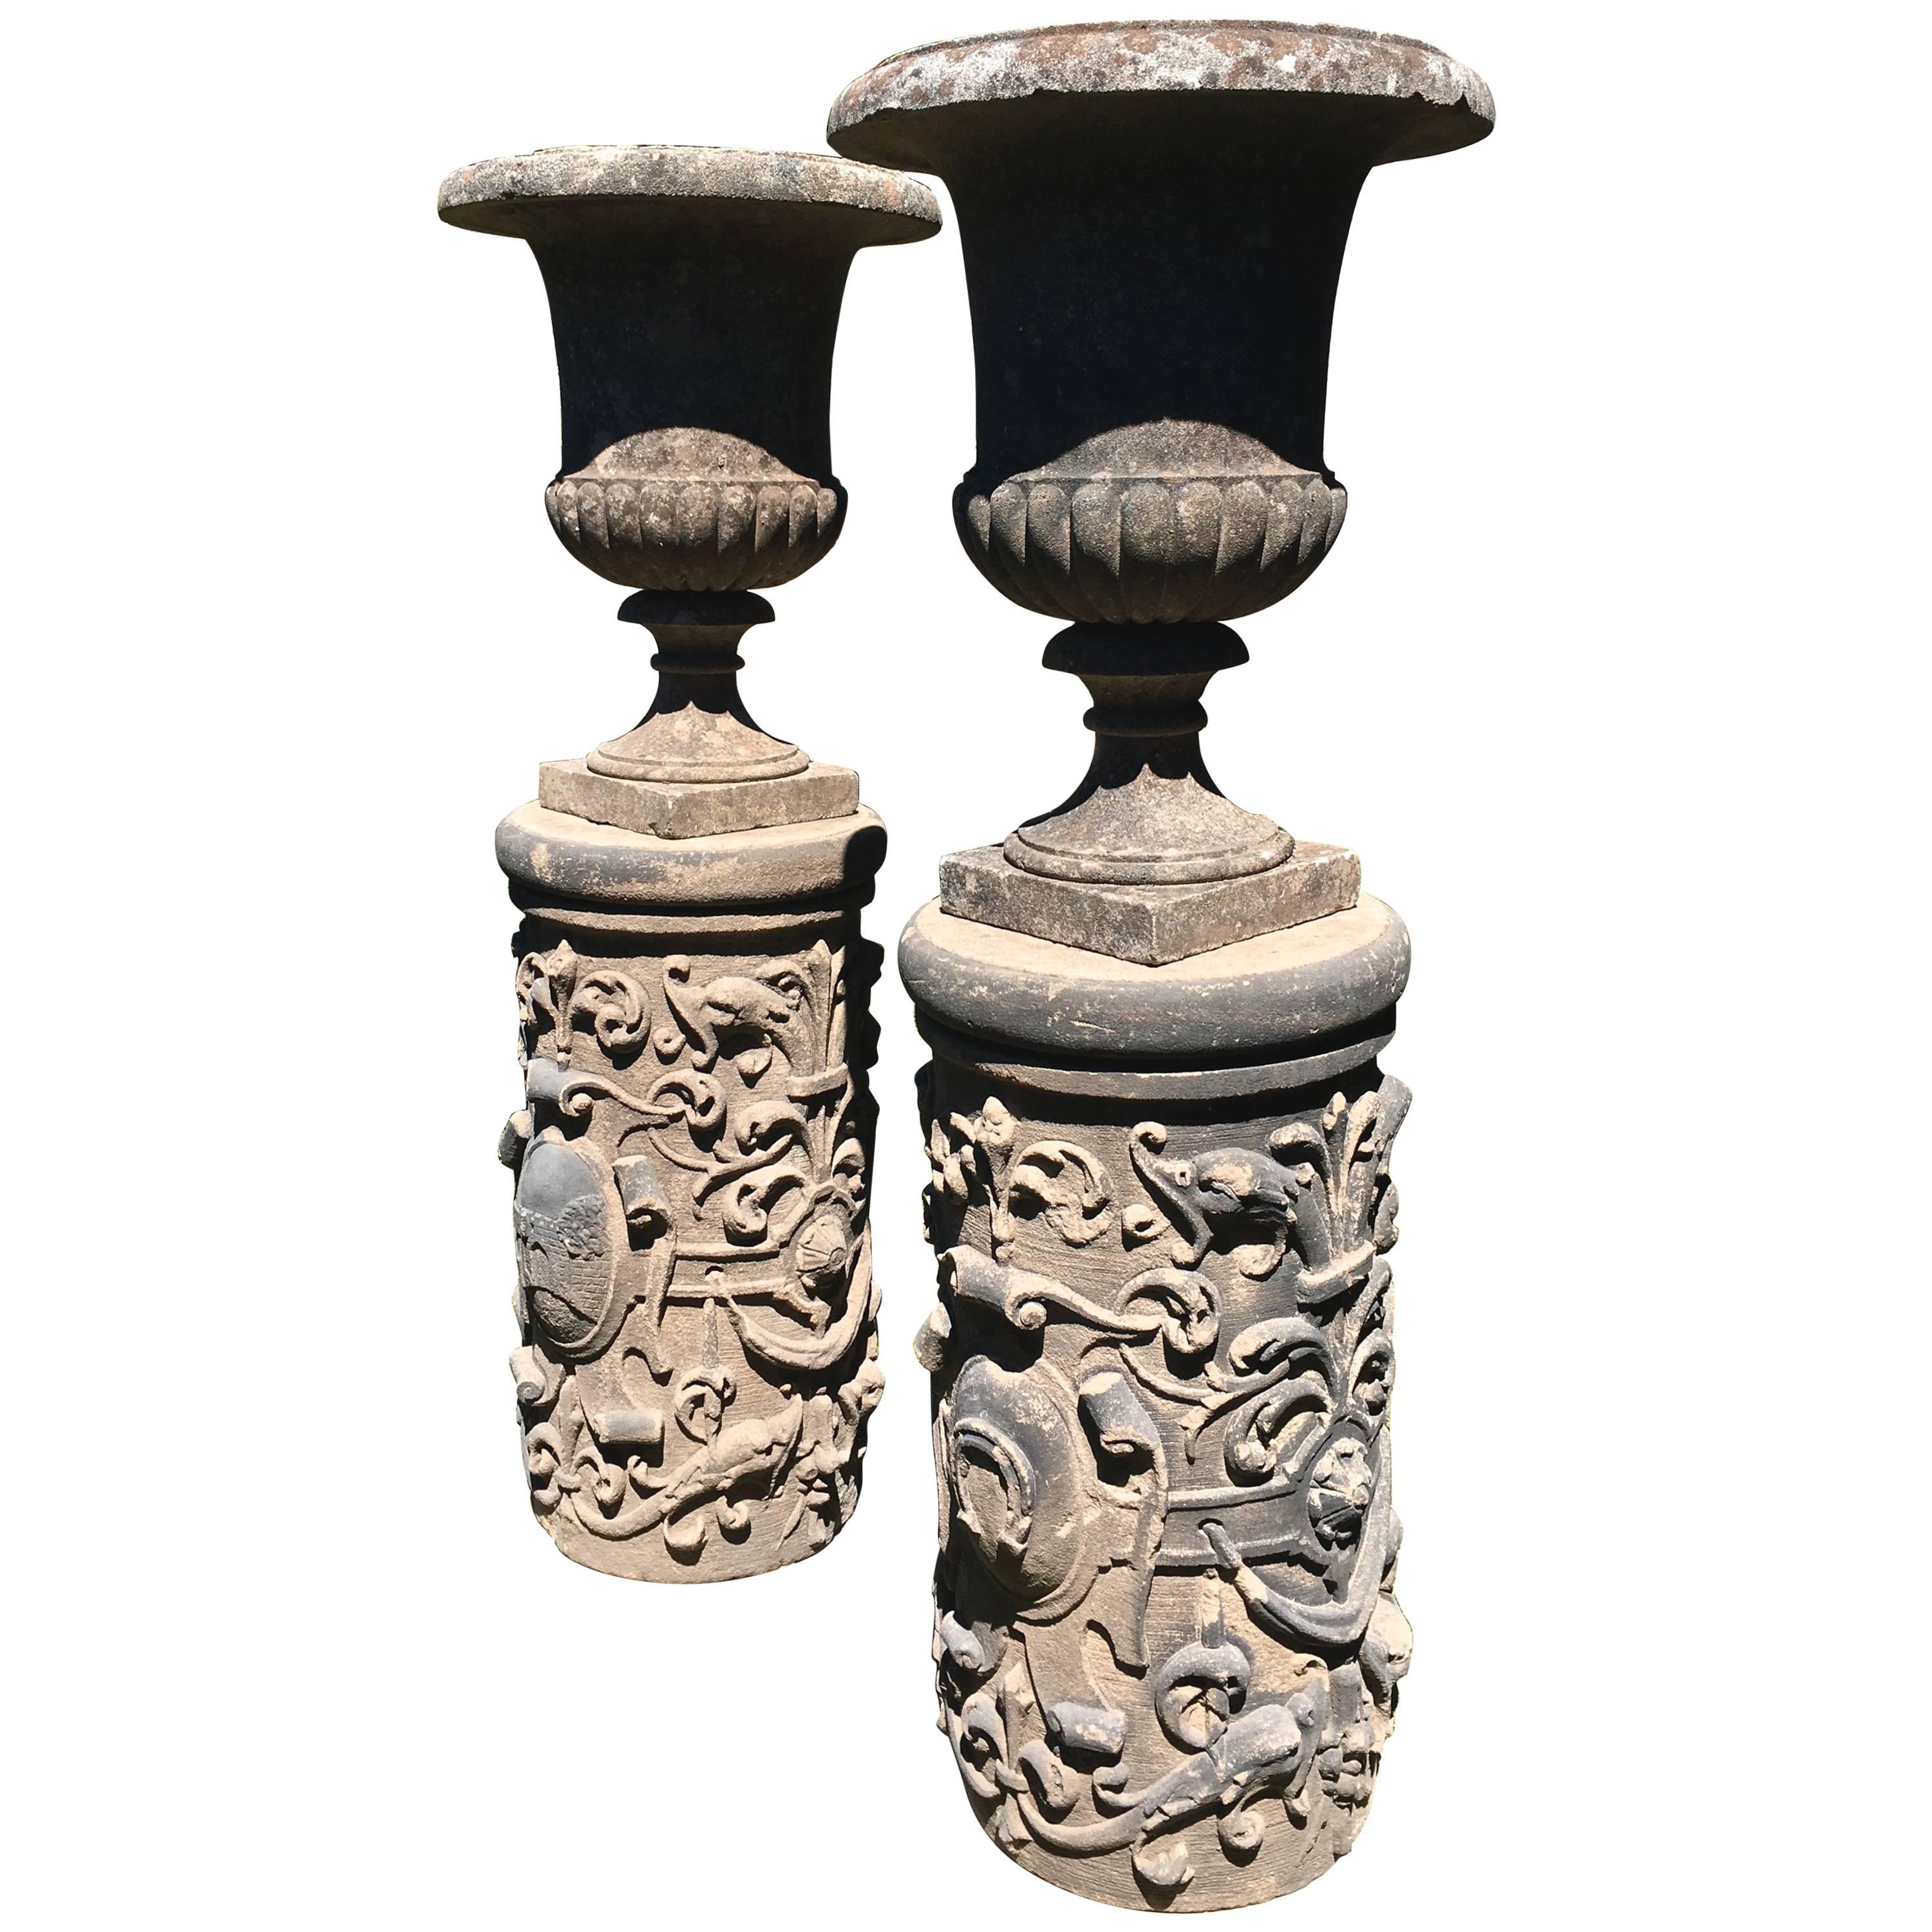 Pair of Tall English Cast Stone Urns on Exceptional 19th C Carved Pedestals